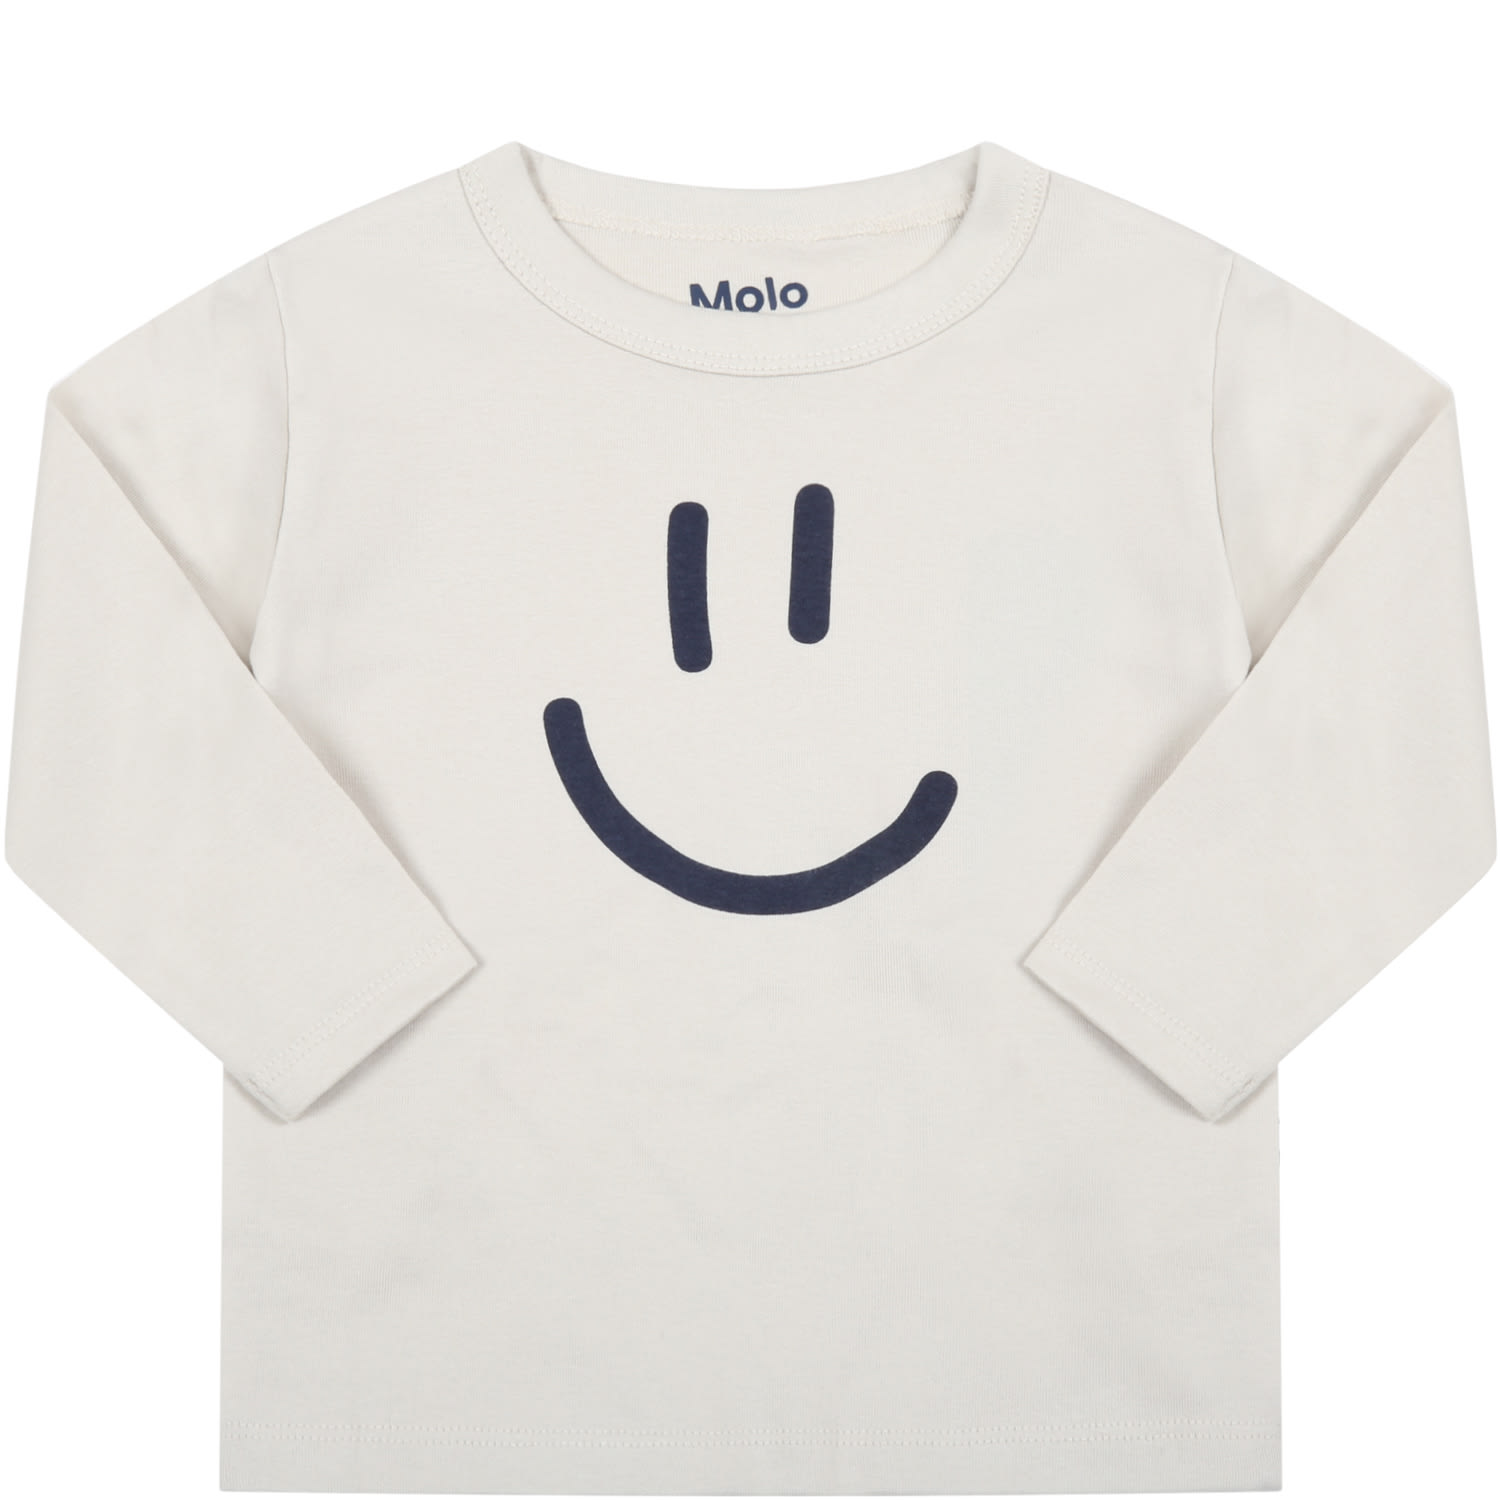 Molo Grey T-shirt For Baby Kids With Smile